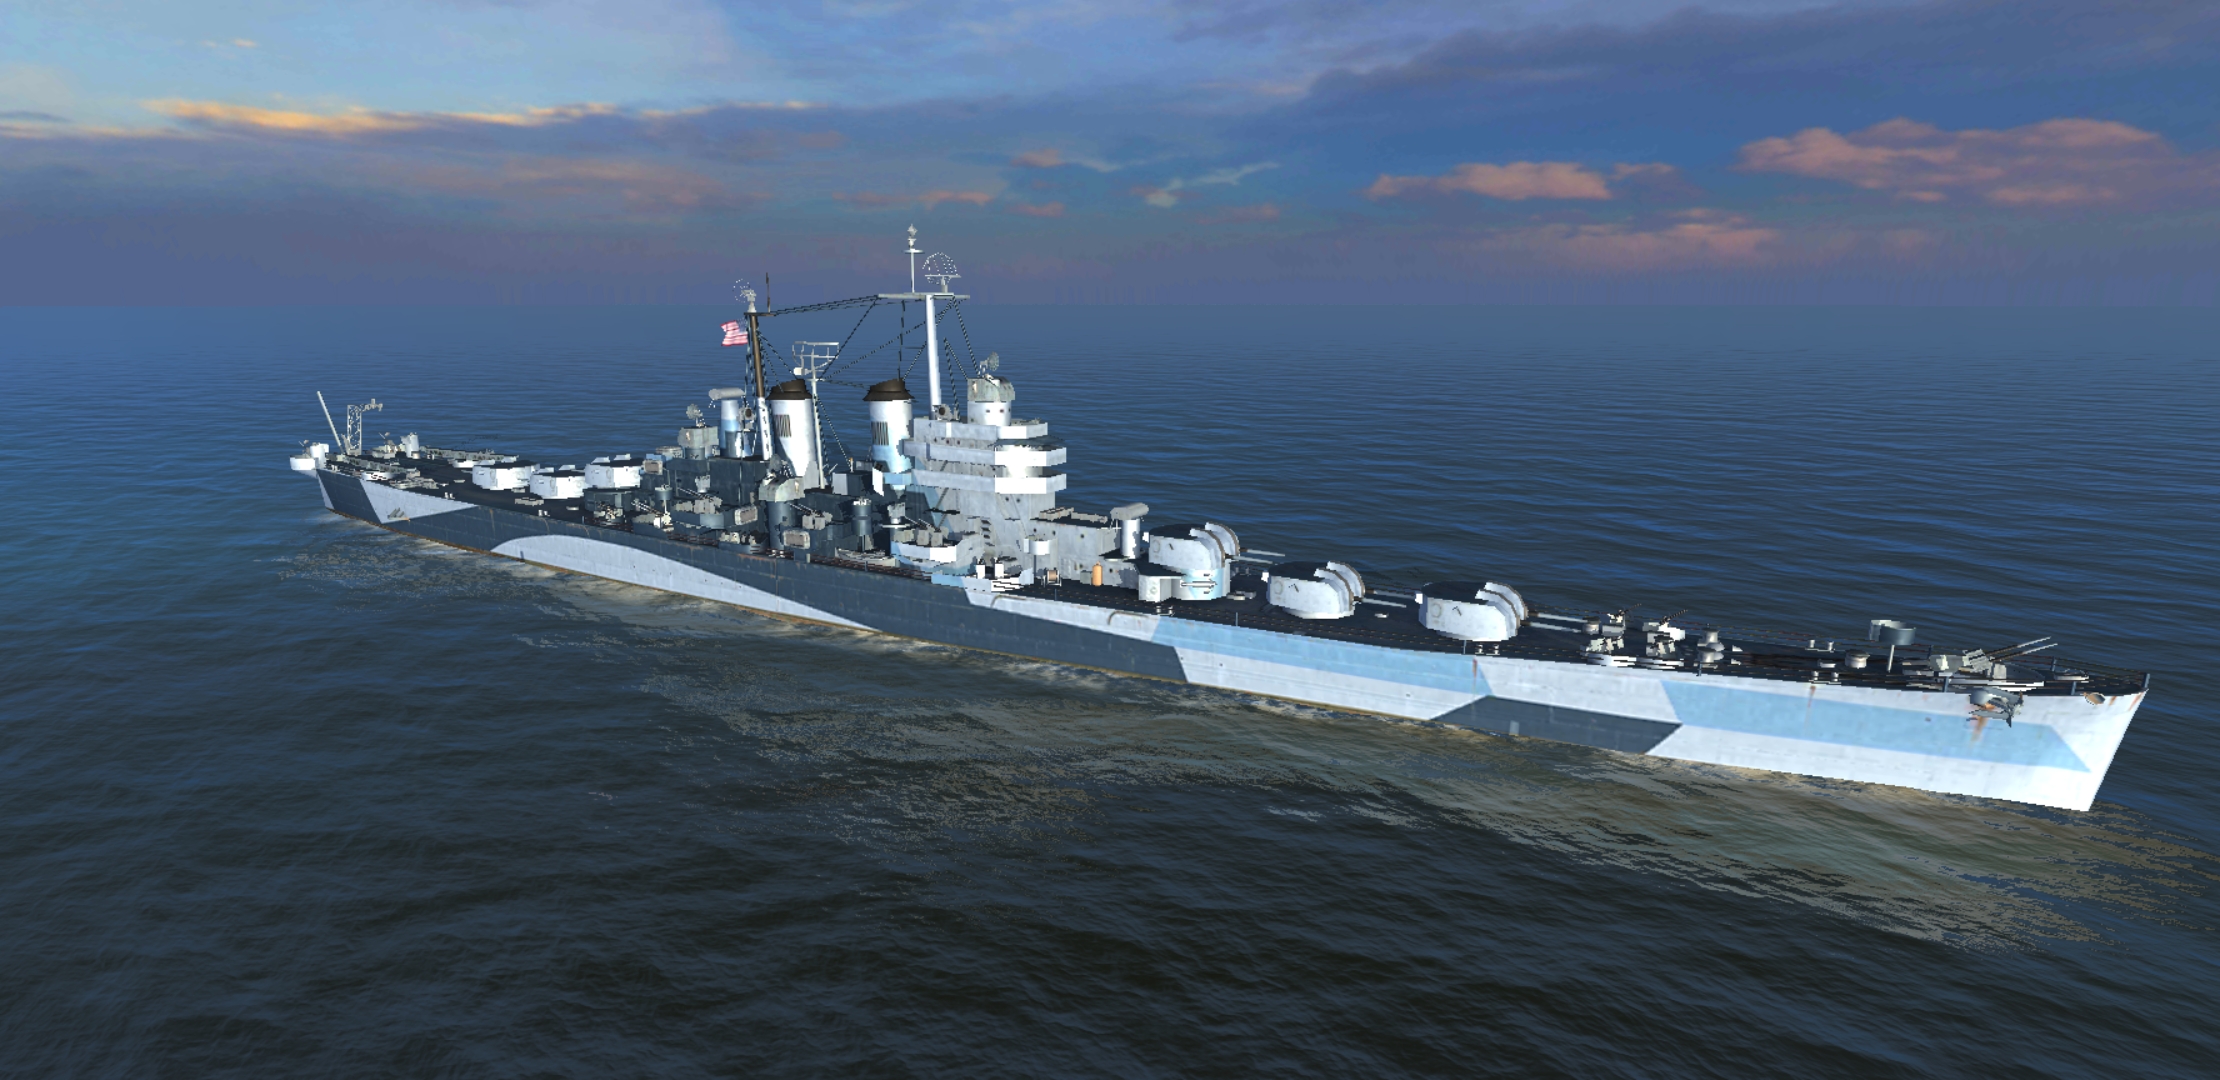 ap vs he world of warships worcester